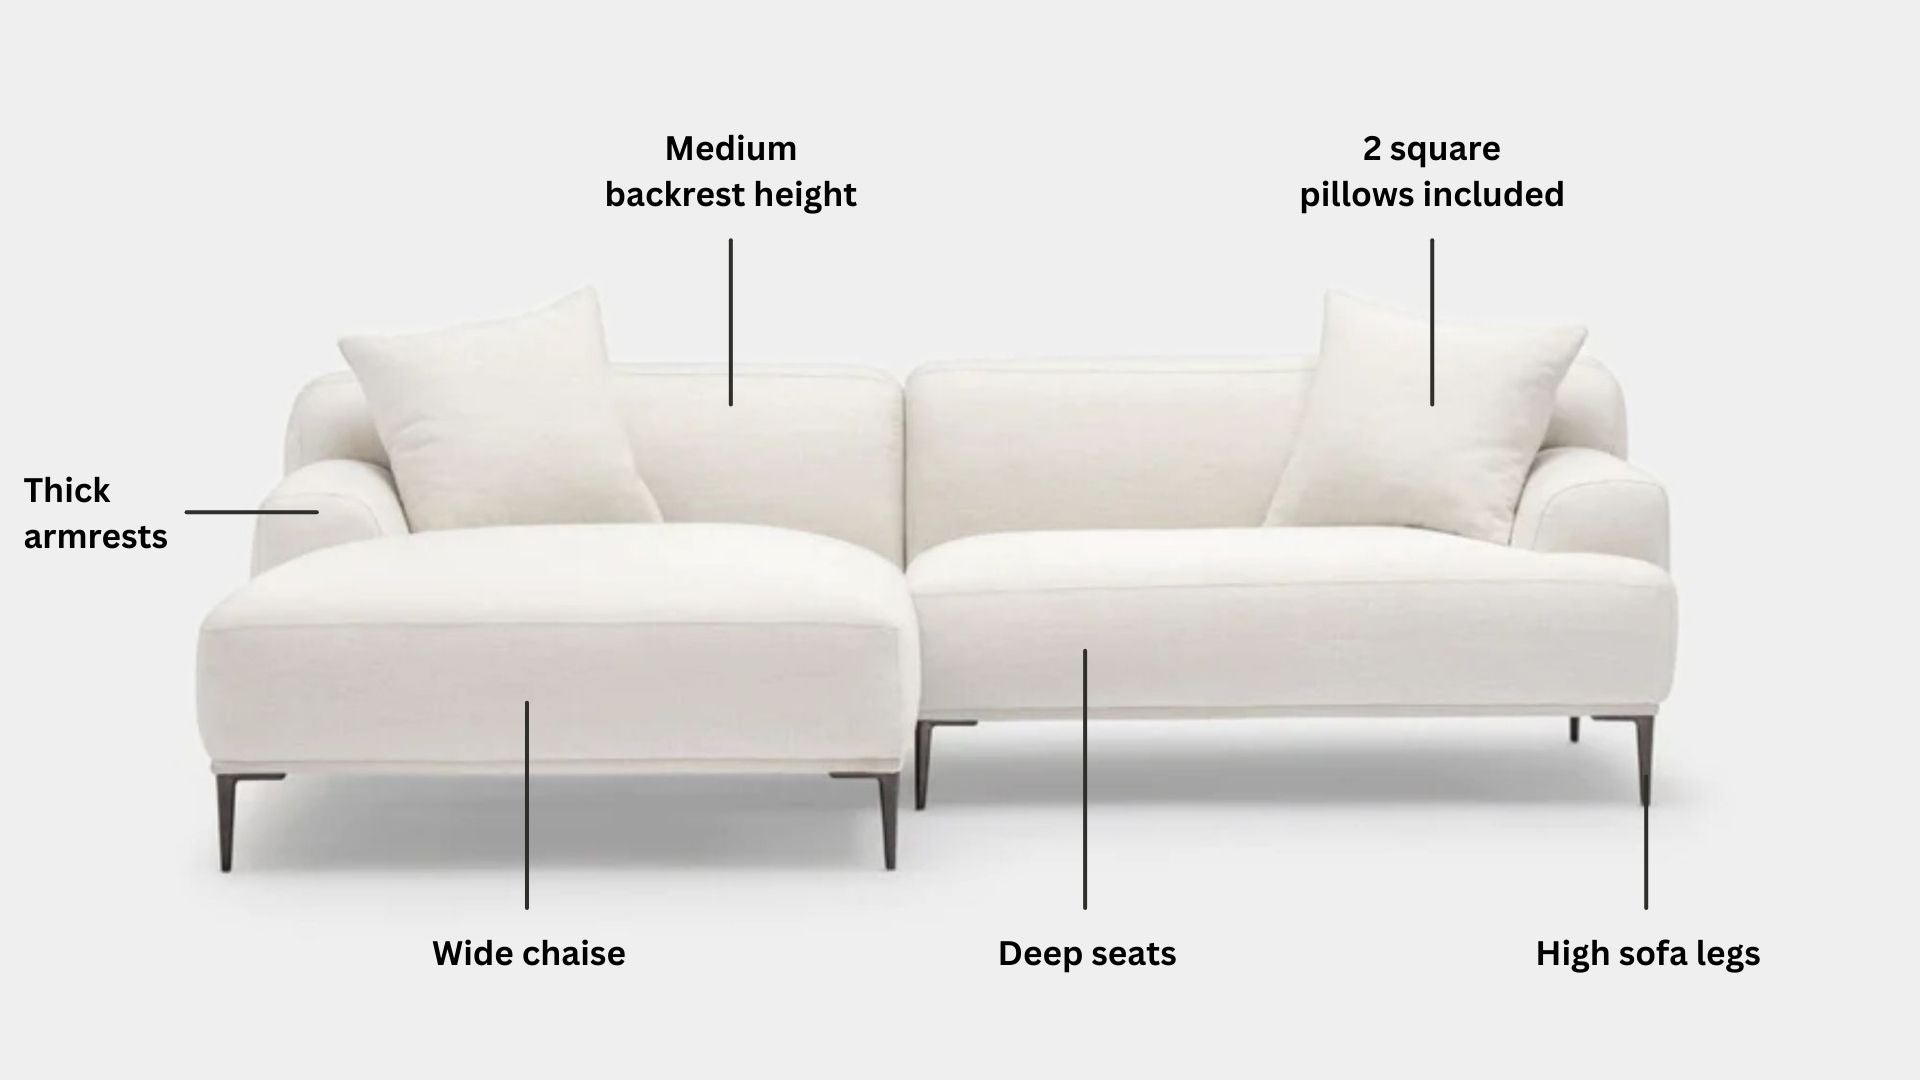 Key features such as armrest thickness, cushion height, seat depth and sofa leg height for Crystal Fabric Sectional Sofa